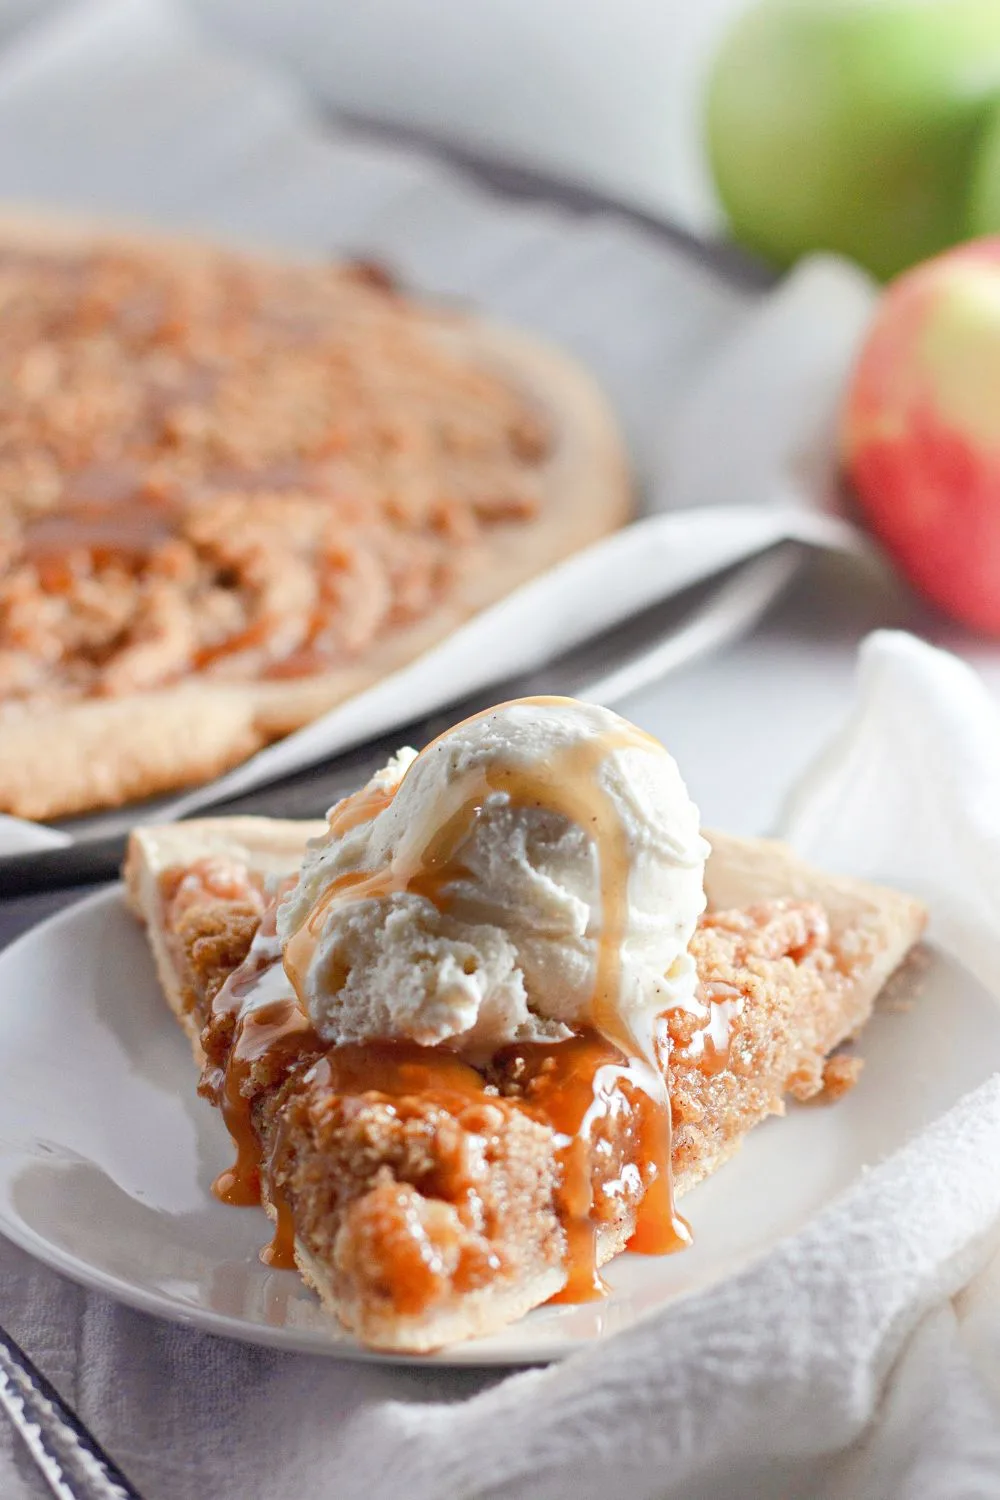 up close image of apple pizza with ice cream on top